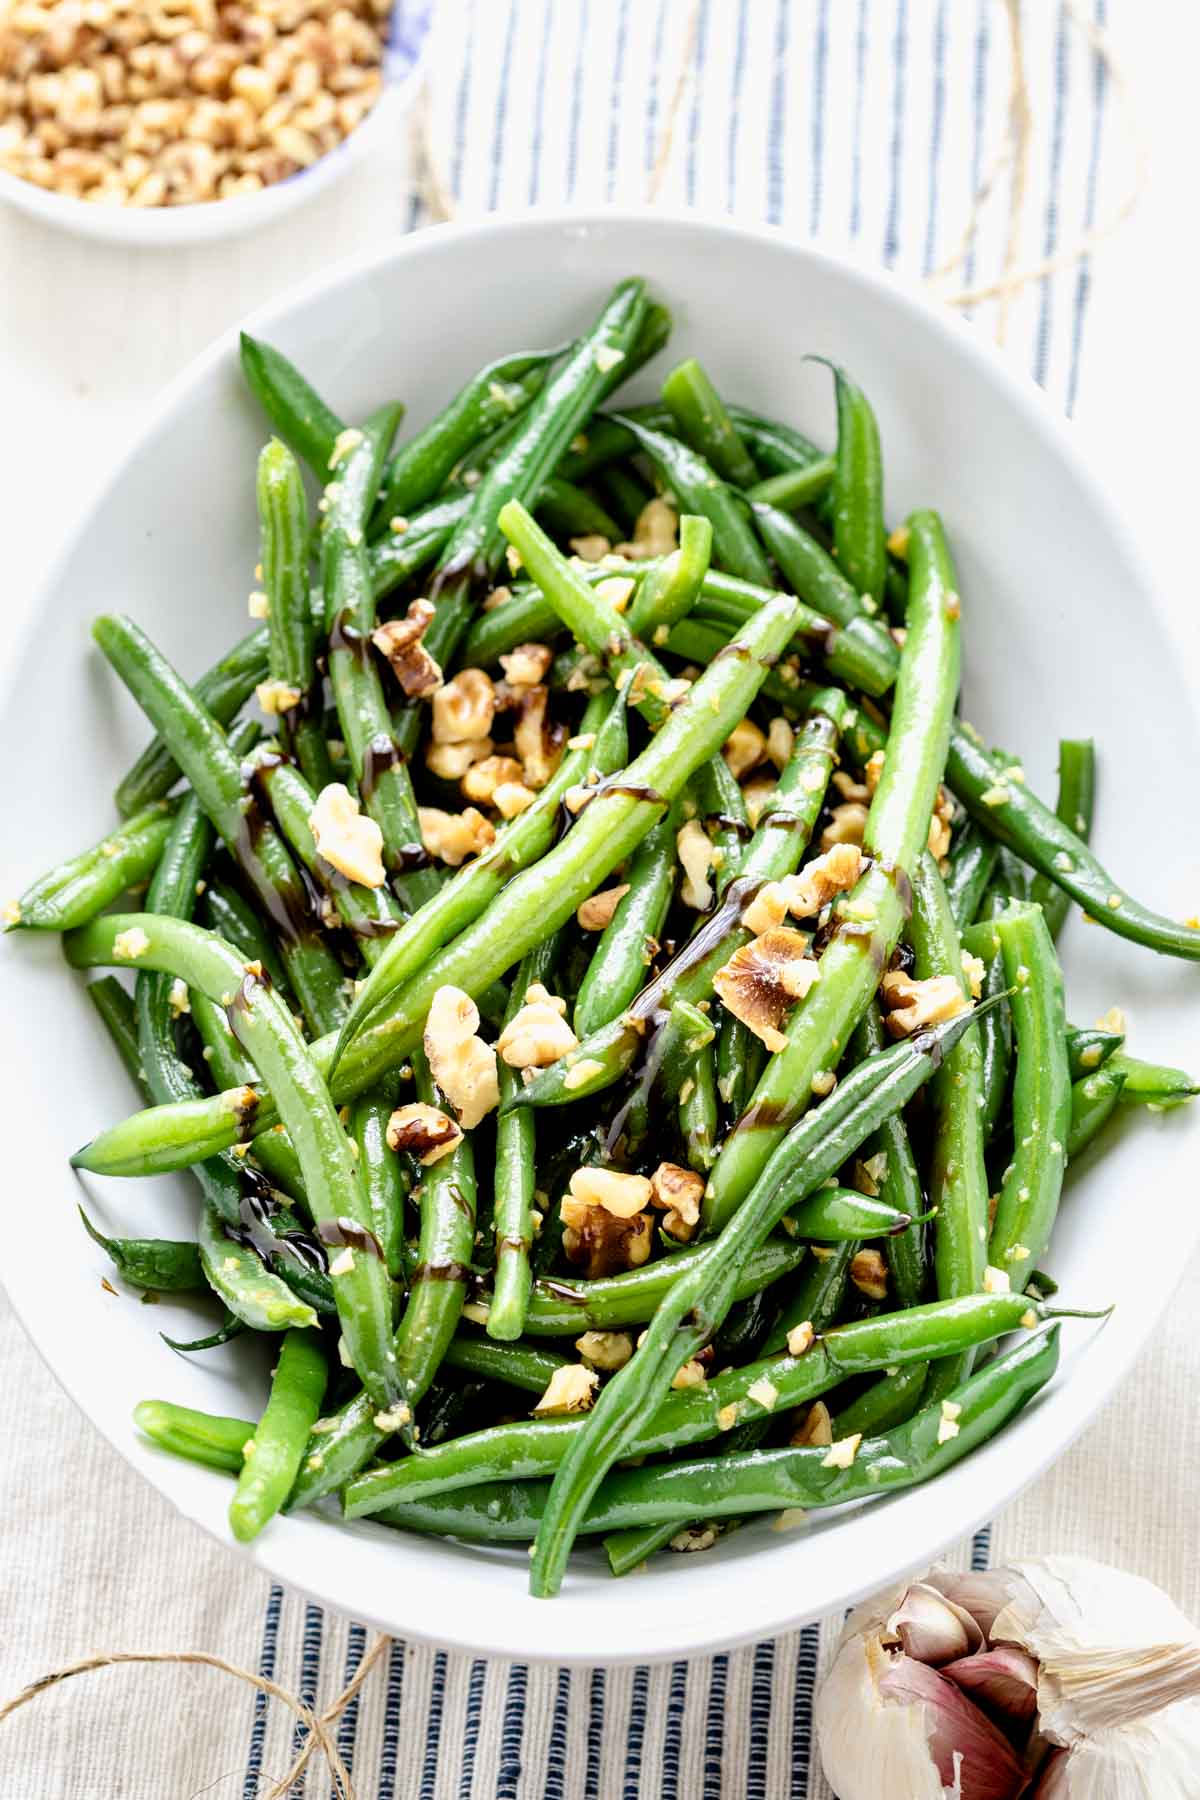 Green beans with balsamic and walnuts in a white serving bowl next to a small bowl of walnuts and a head of garlic